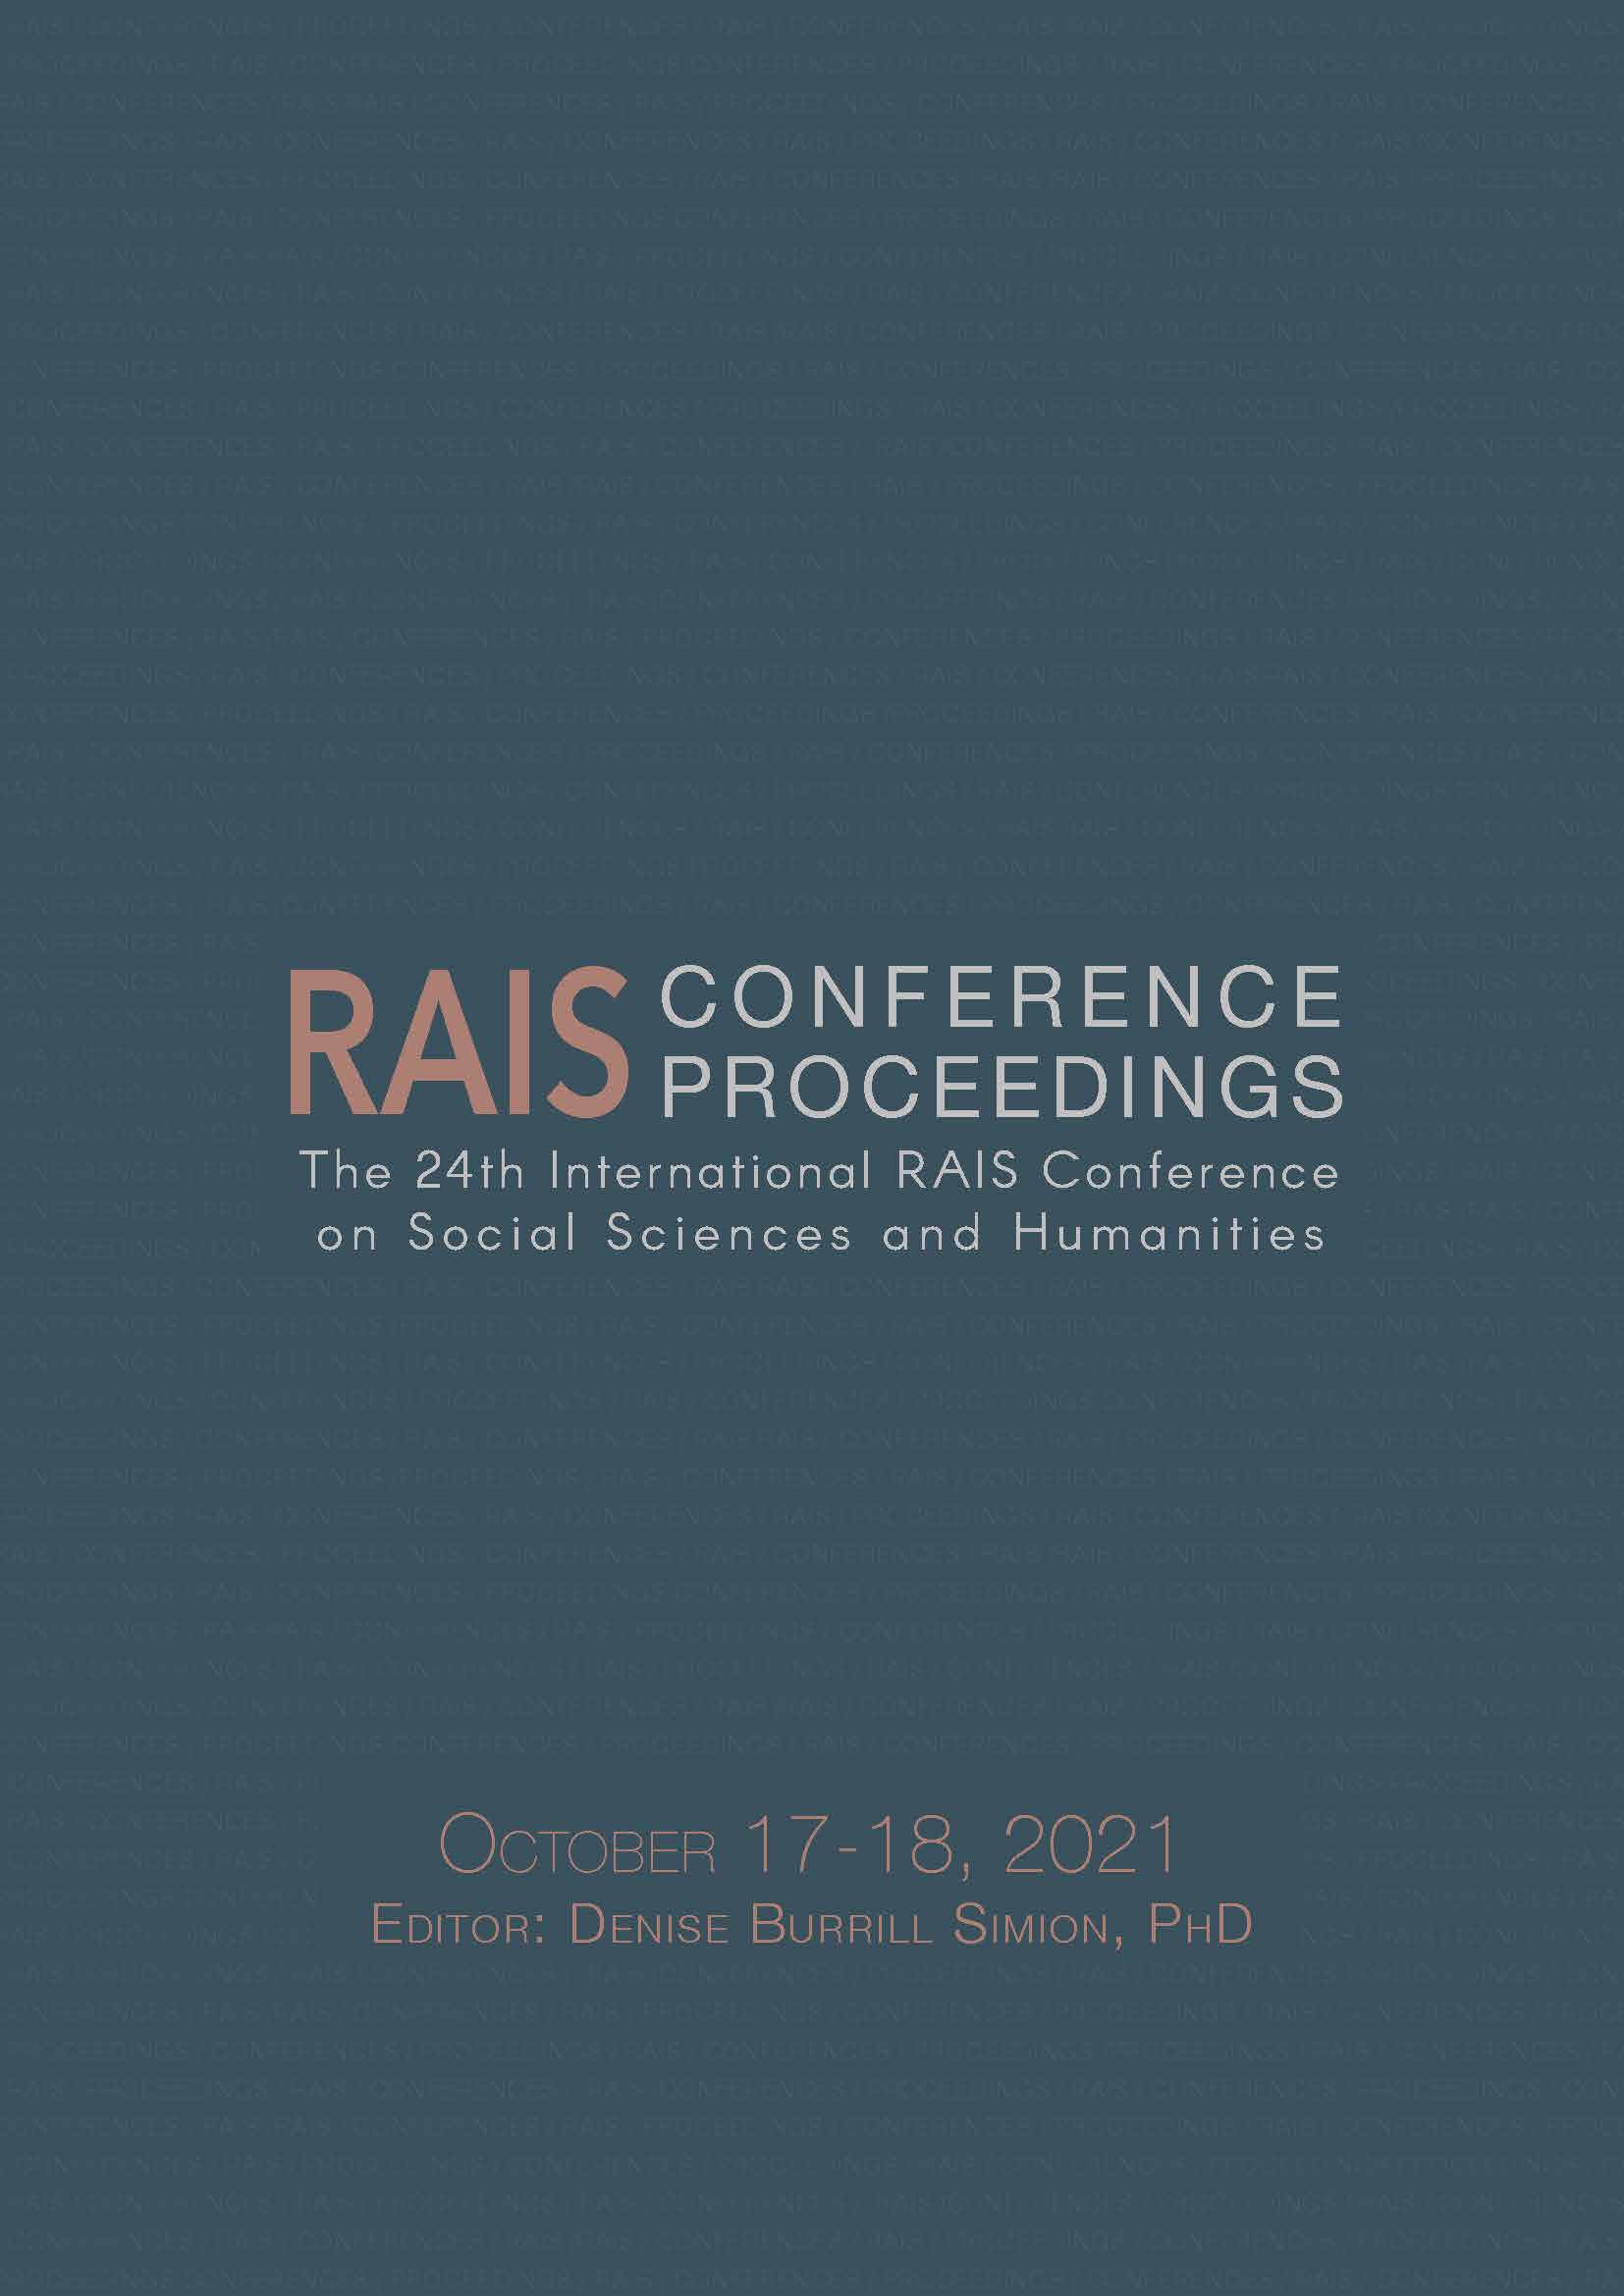 Proceedings of the 24th International RAIS Conference on Social Sciences and Humanities